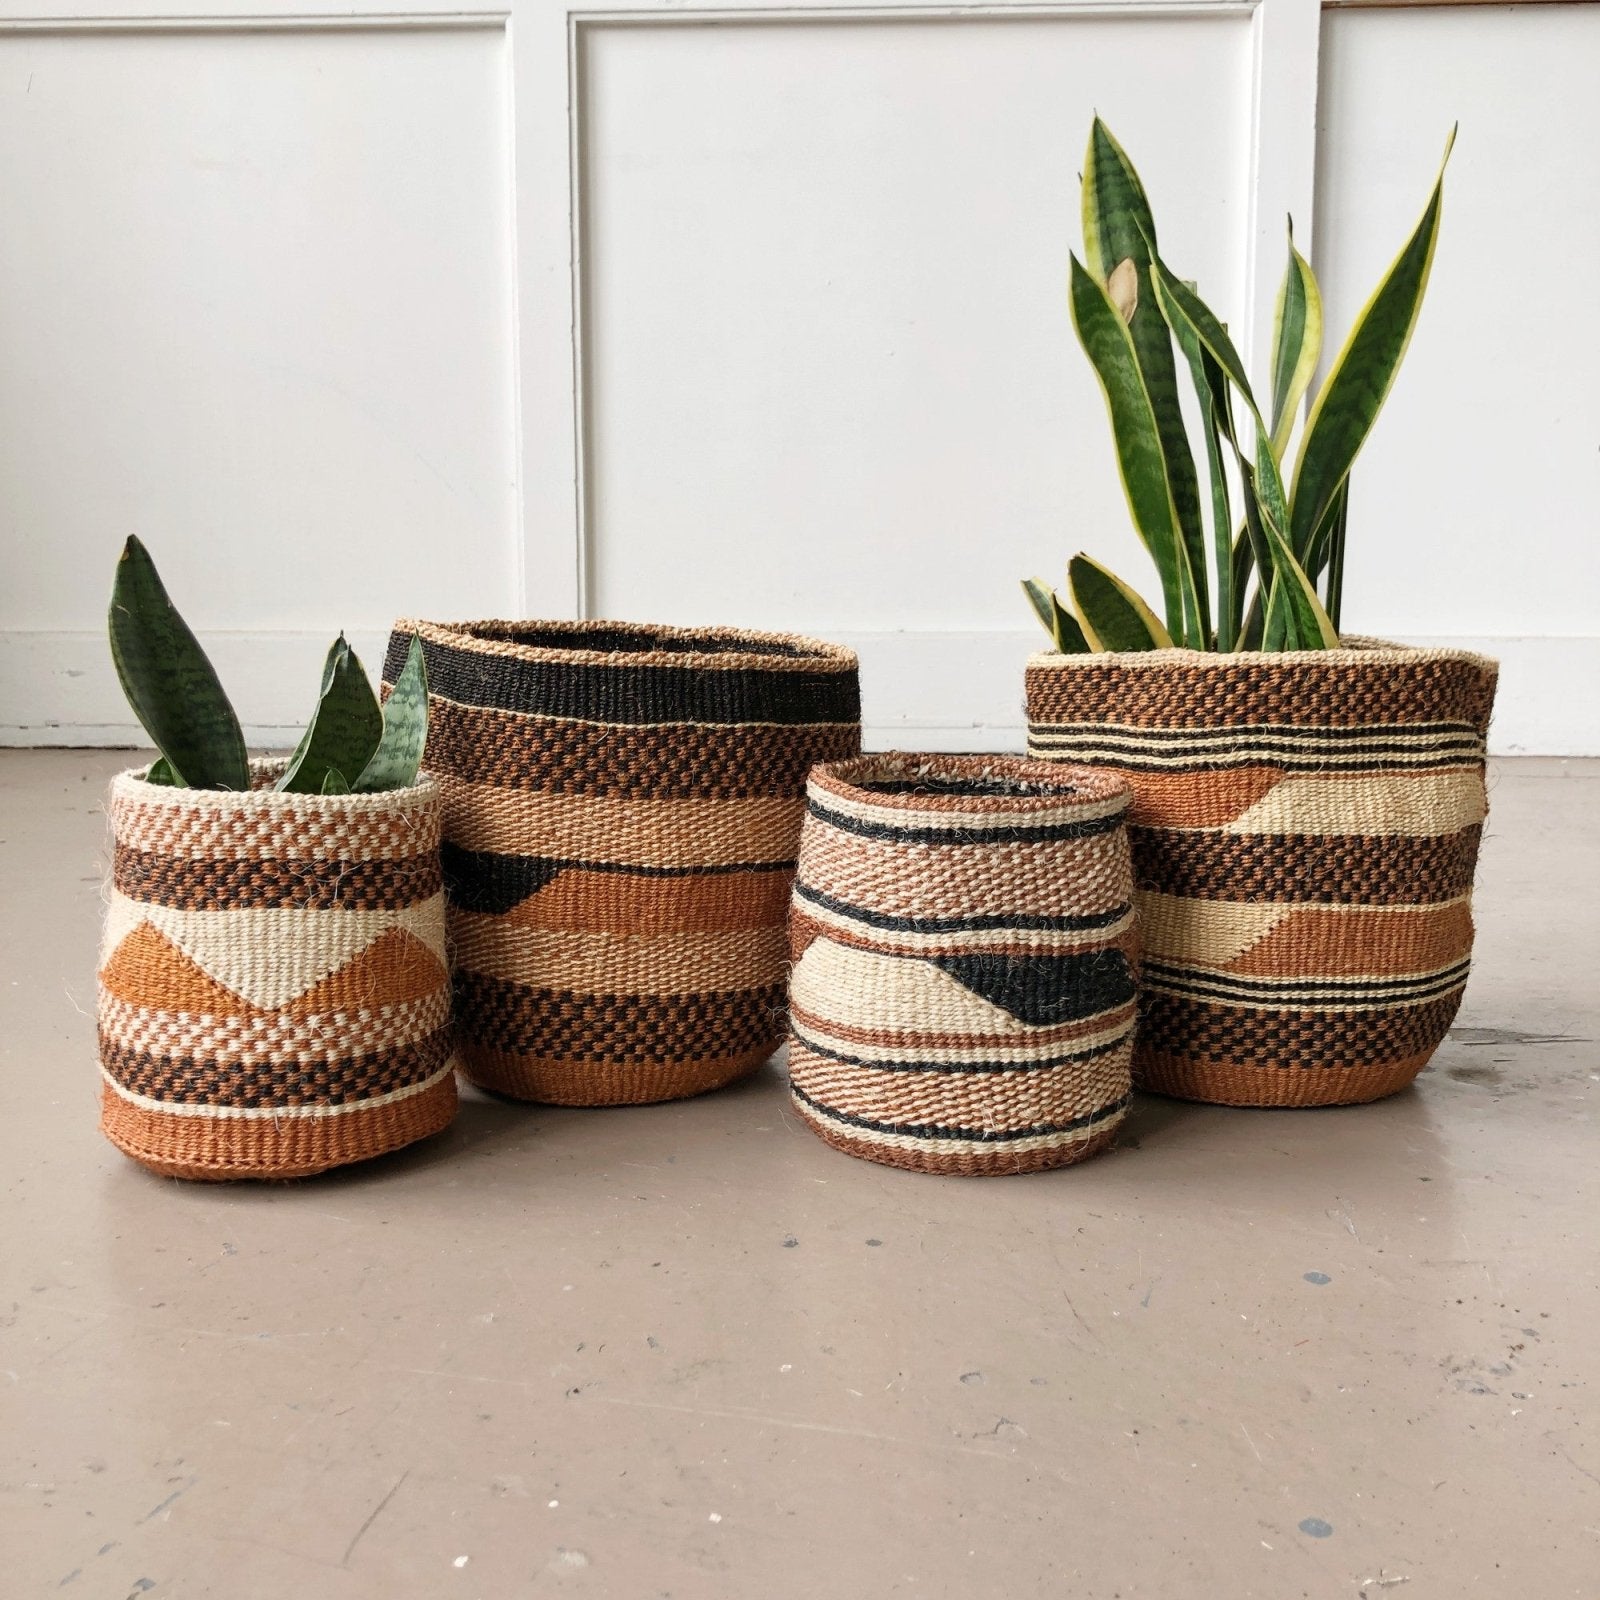 Woven Dry Basket Planters